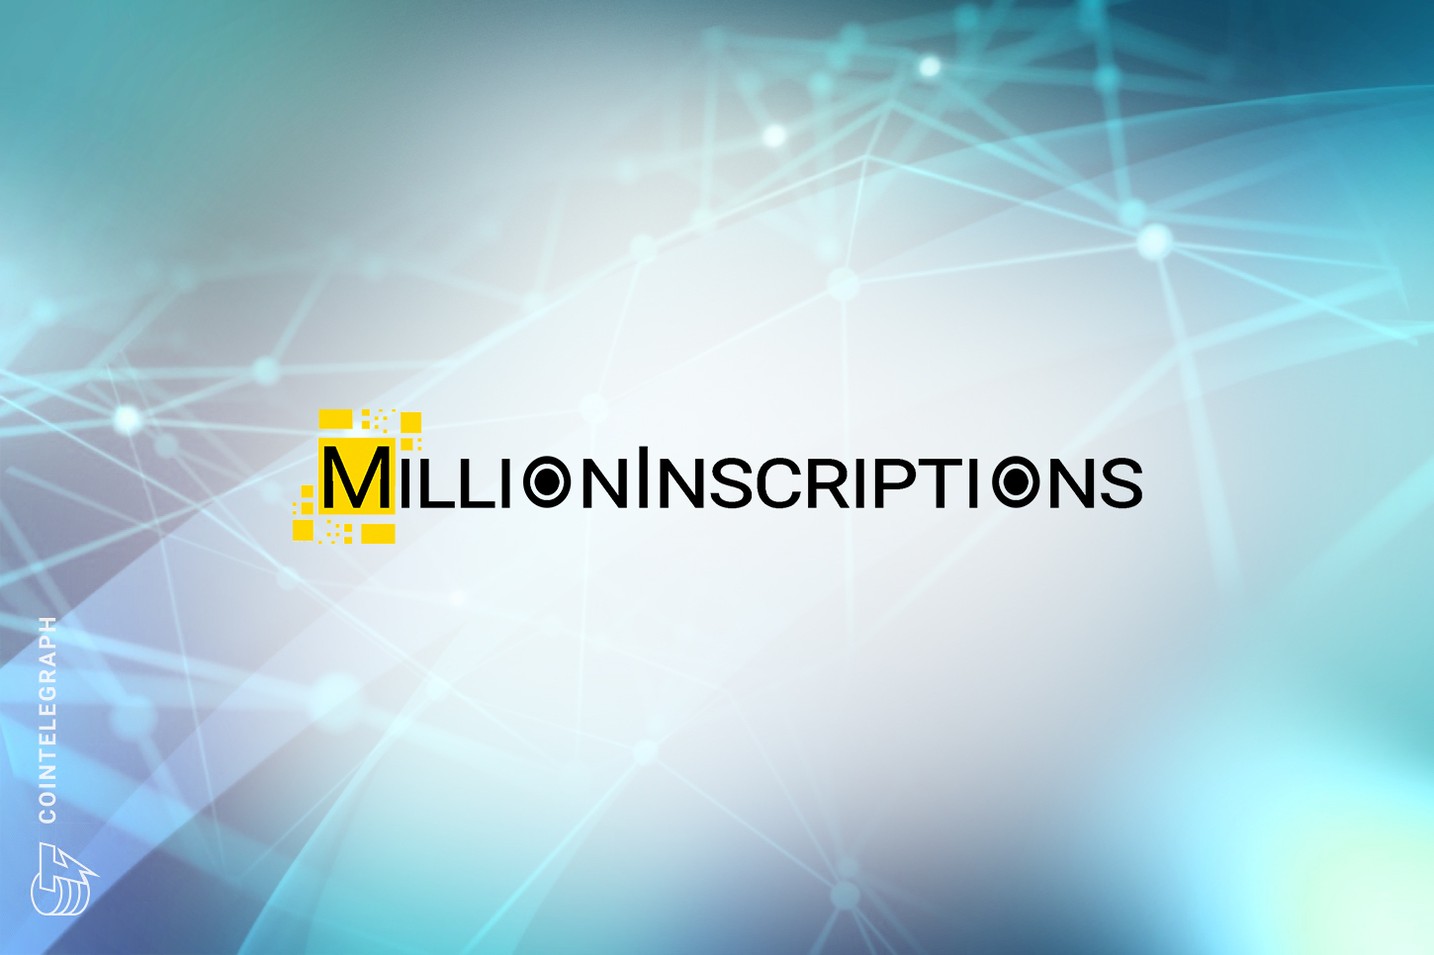 MillionInscriptions has launched — The ultimate showcase and ad platform for Ordinal NFTs